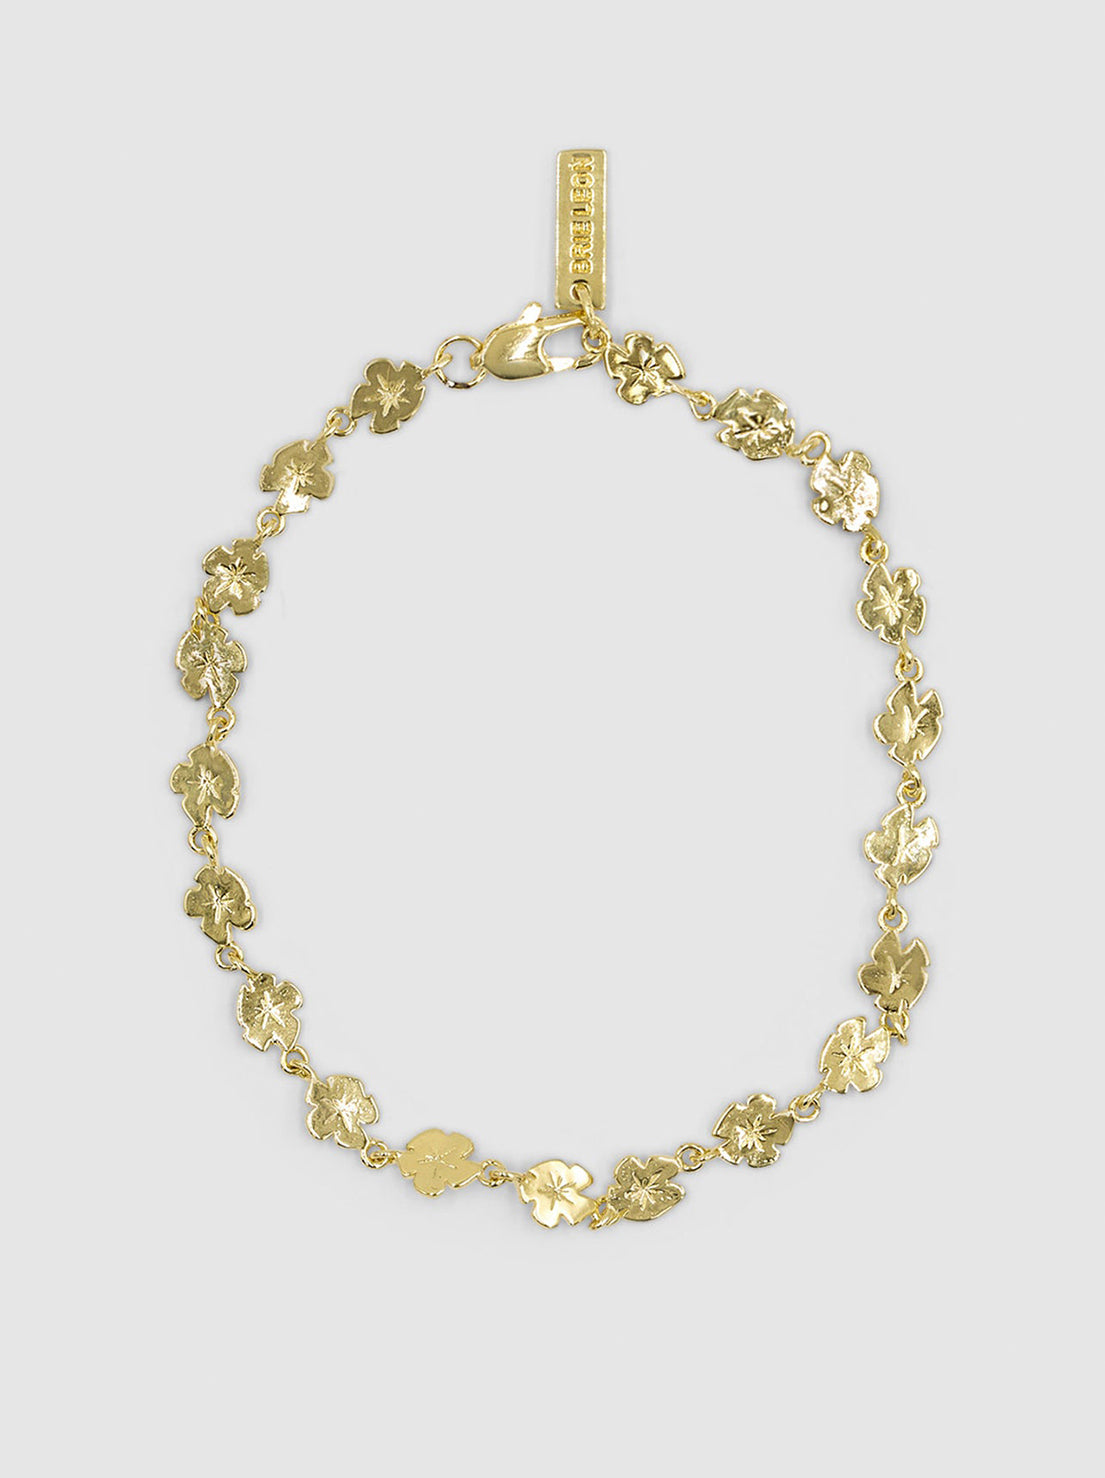 Brie Leon - Hibiscus Bracelet - Gold Plated